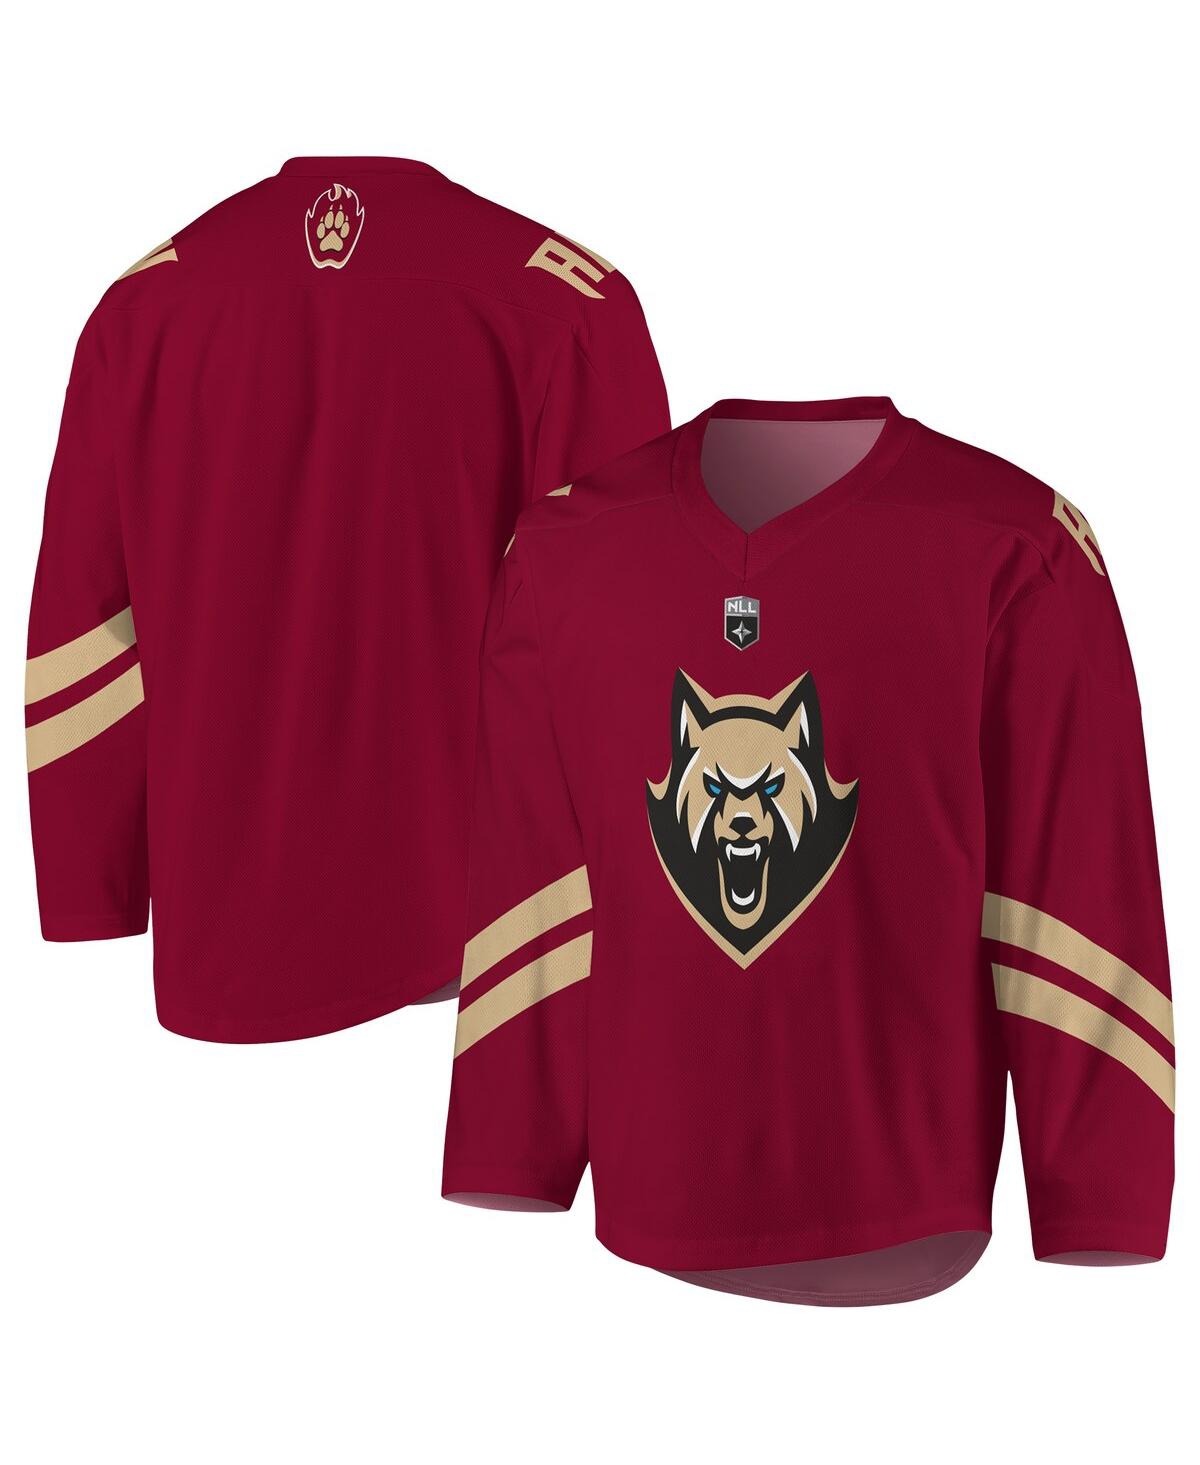 Men's Maroon Albany FireWolves Sublimated Replica Jersey - Maroon